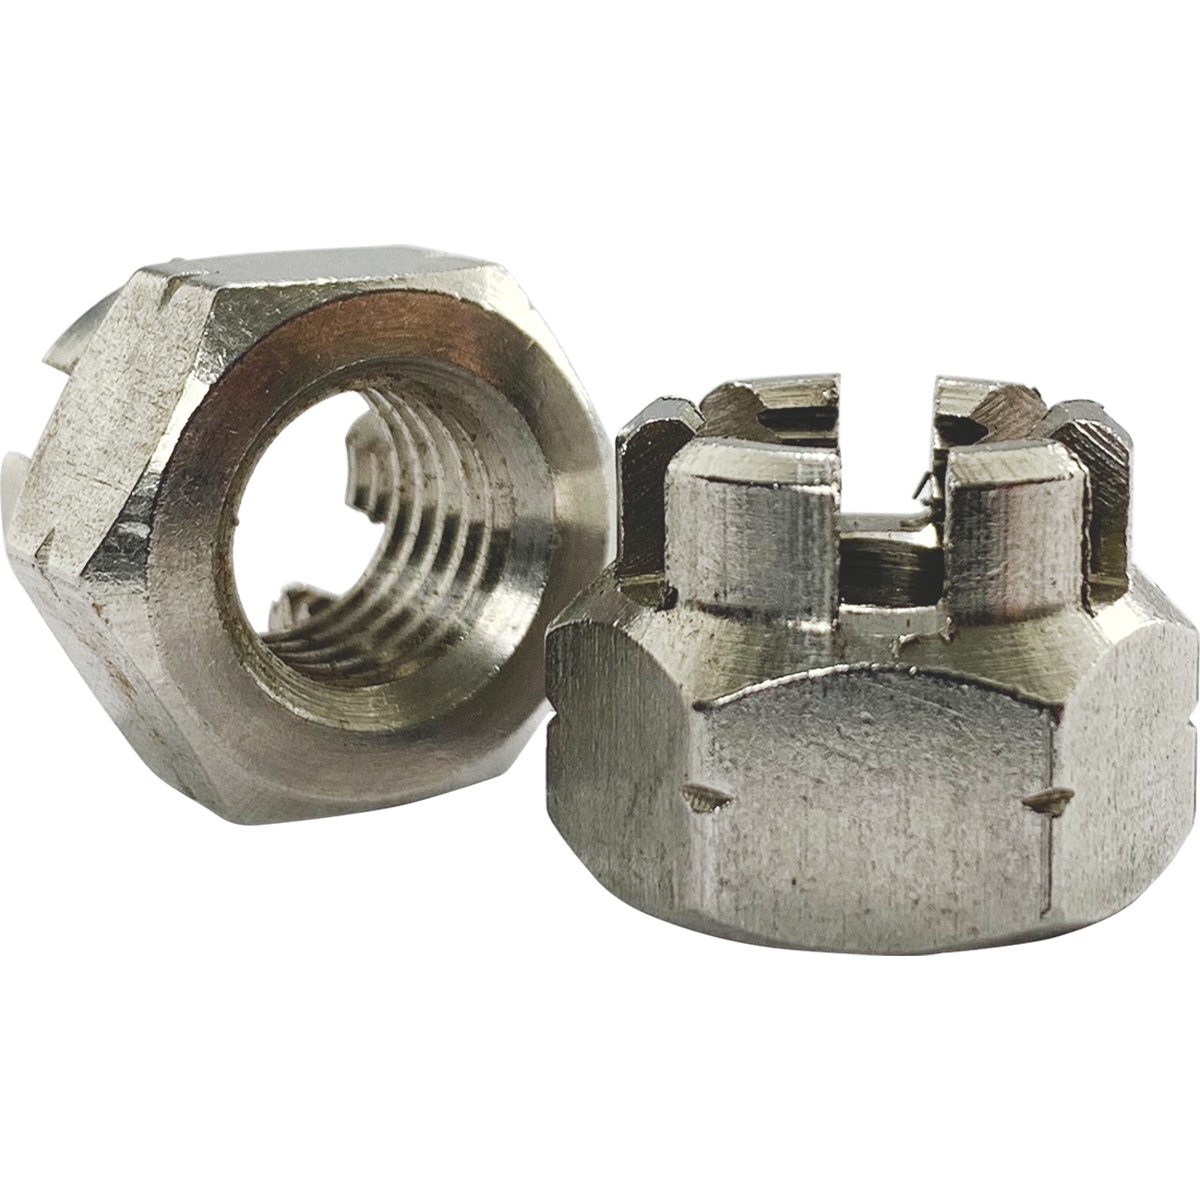 A2 stainless steel castle nuts, also known as castellated nuts